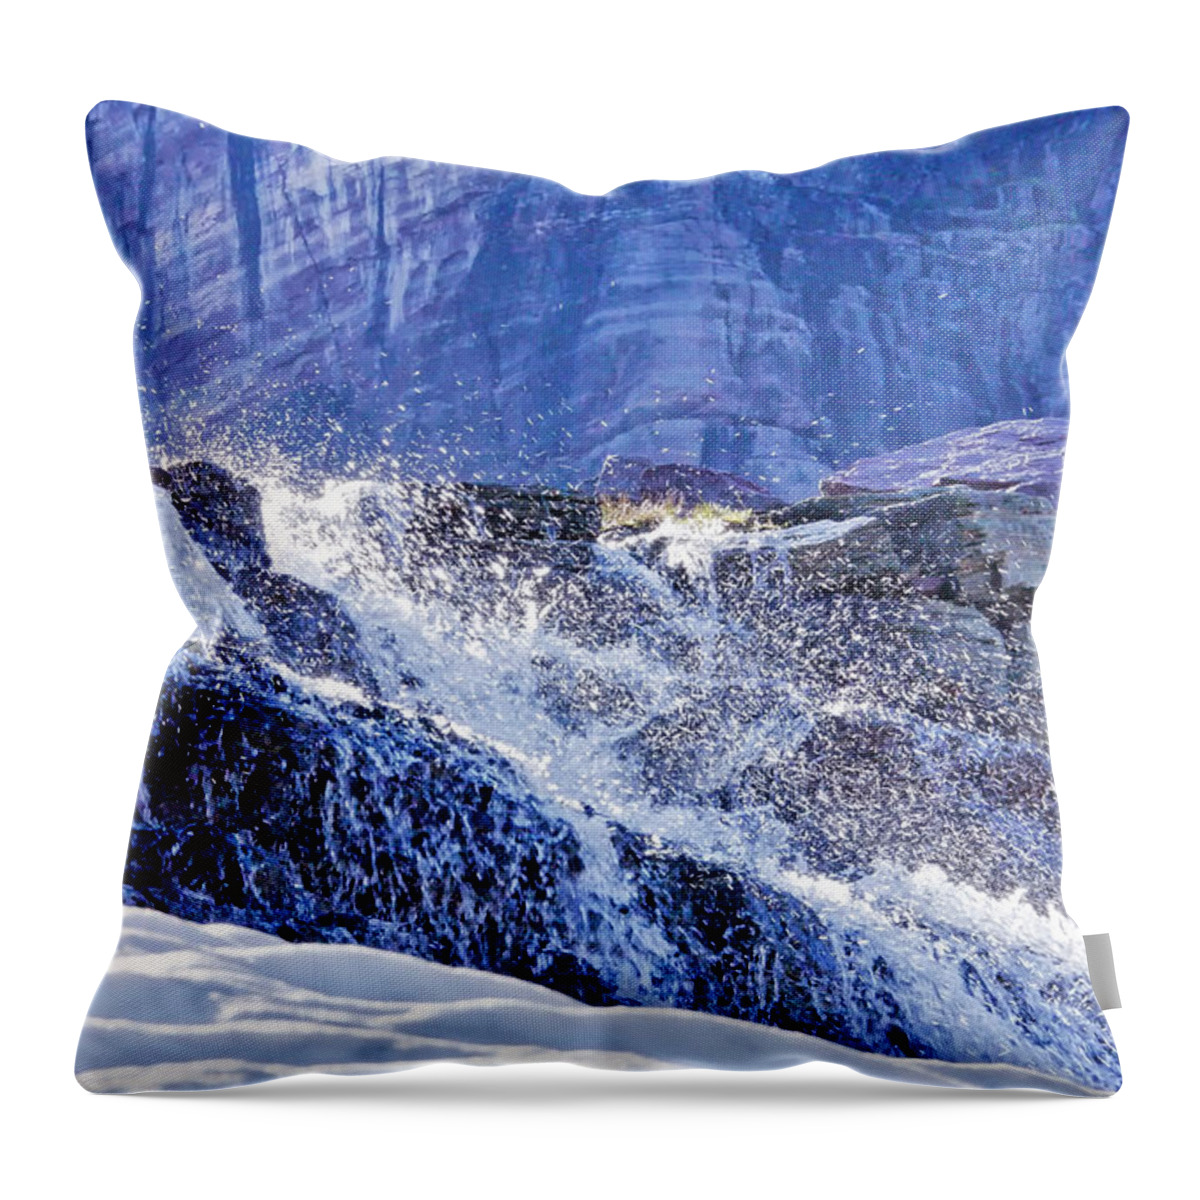 Glacier Throw Pillow featuring the photograph Icy Cascade by Albert Seger